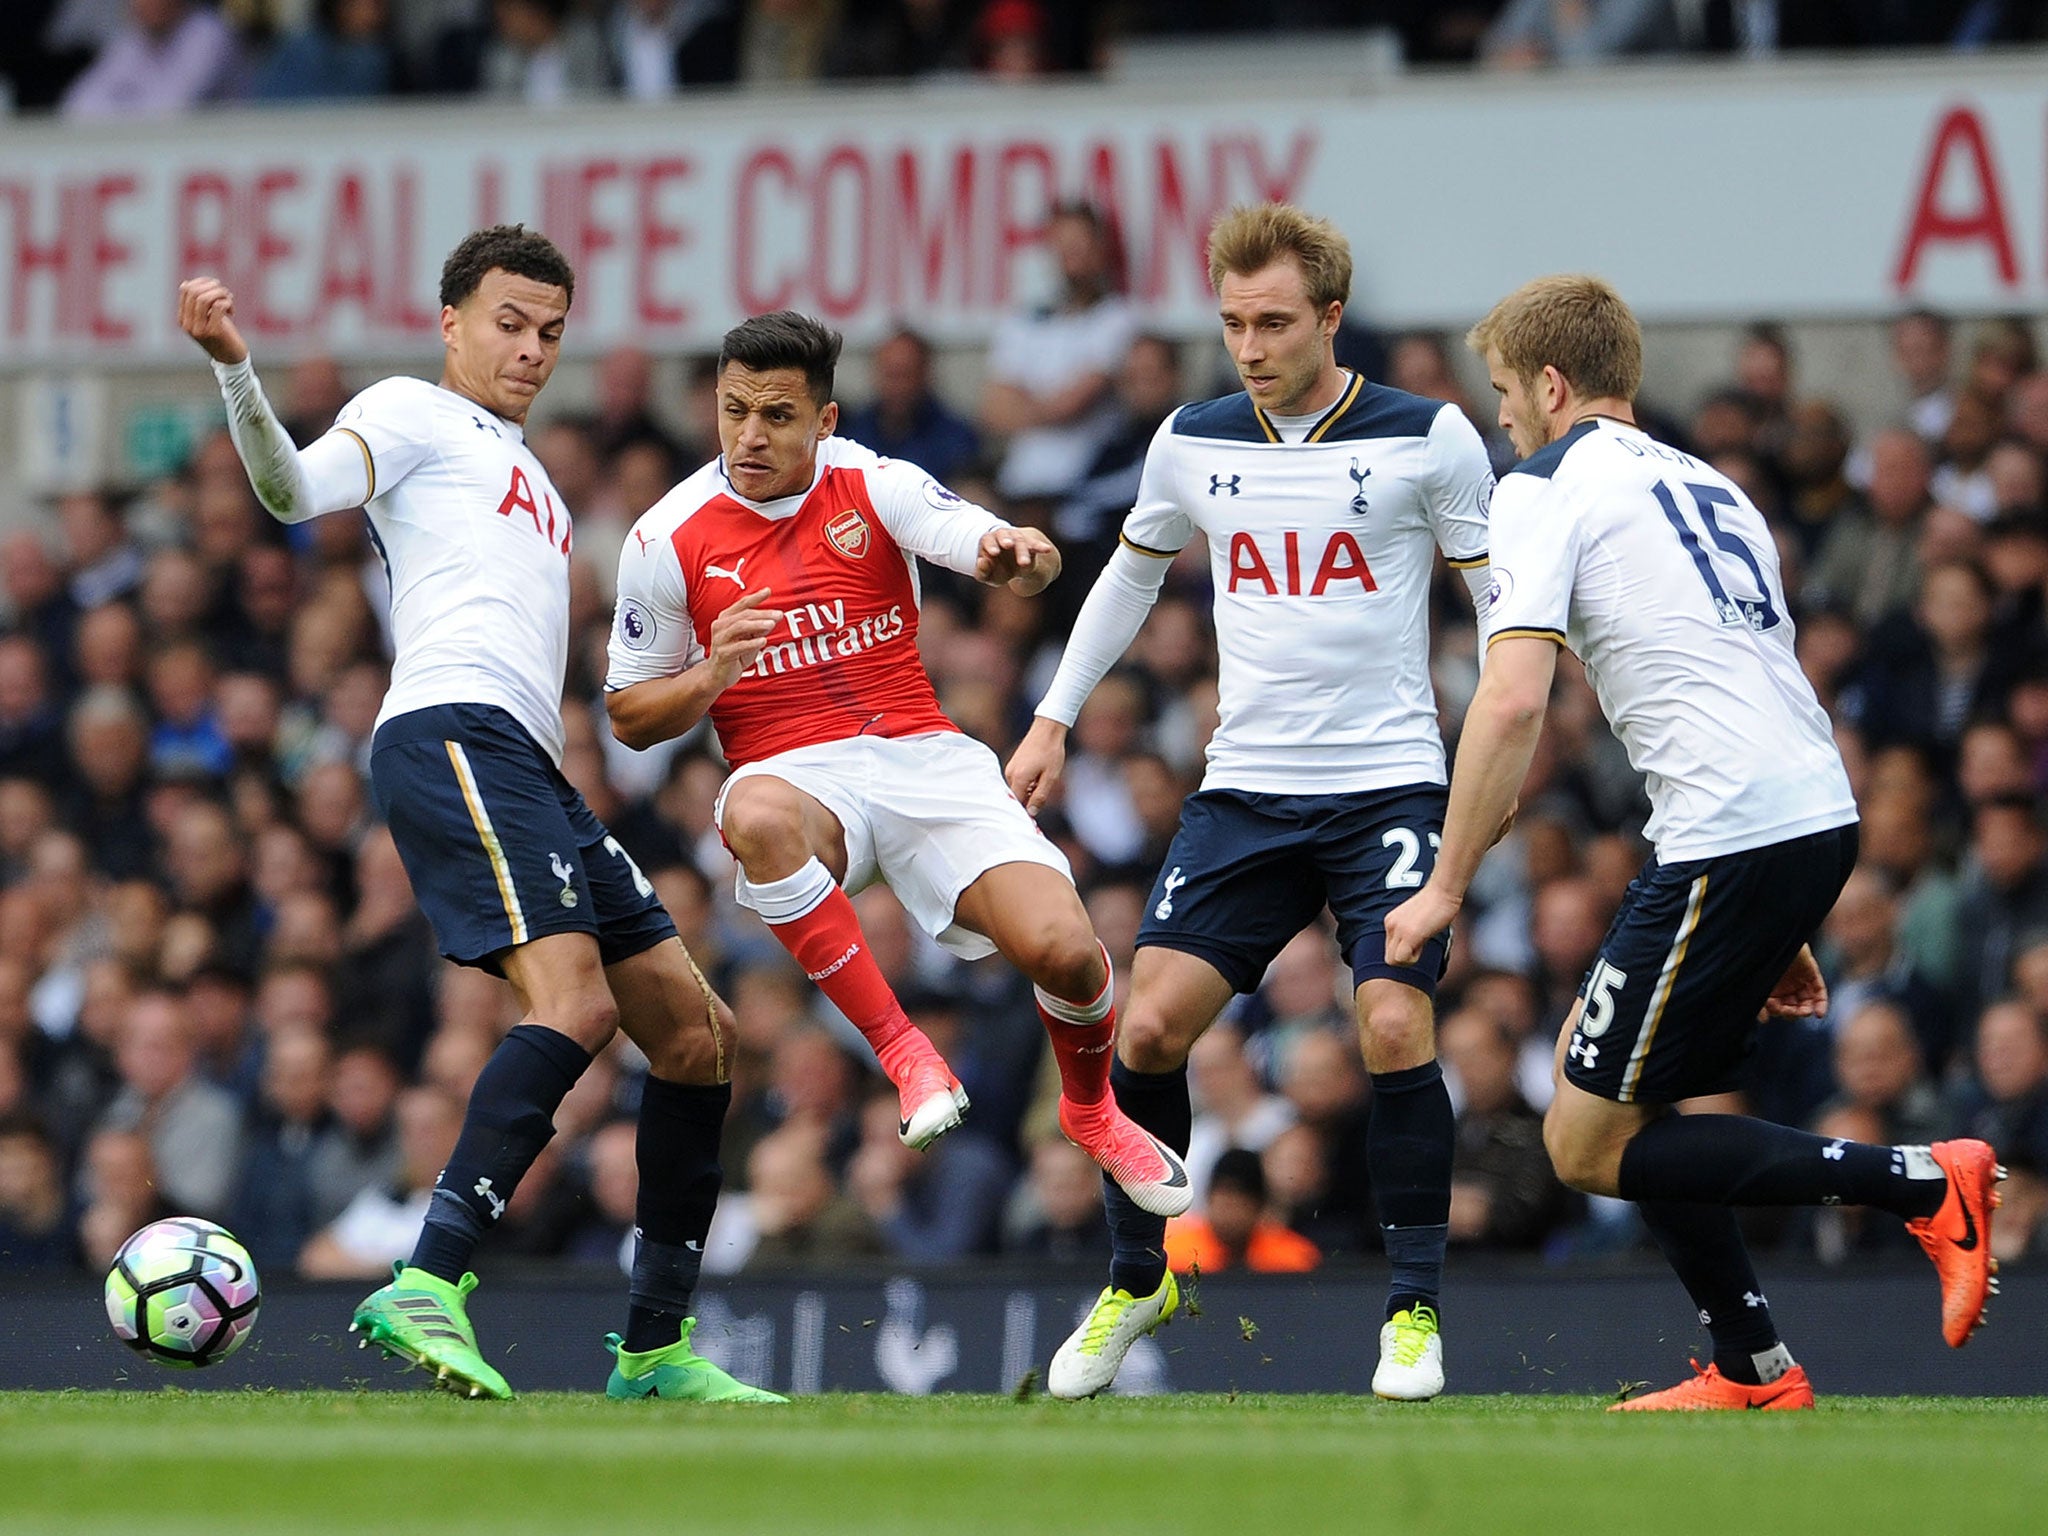 Arsenal vs Tottenham: What time does it start, where can I watch it and what are the odds?